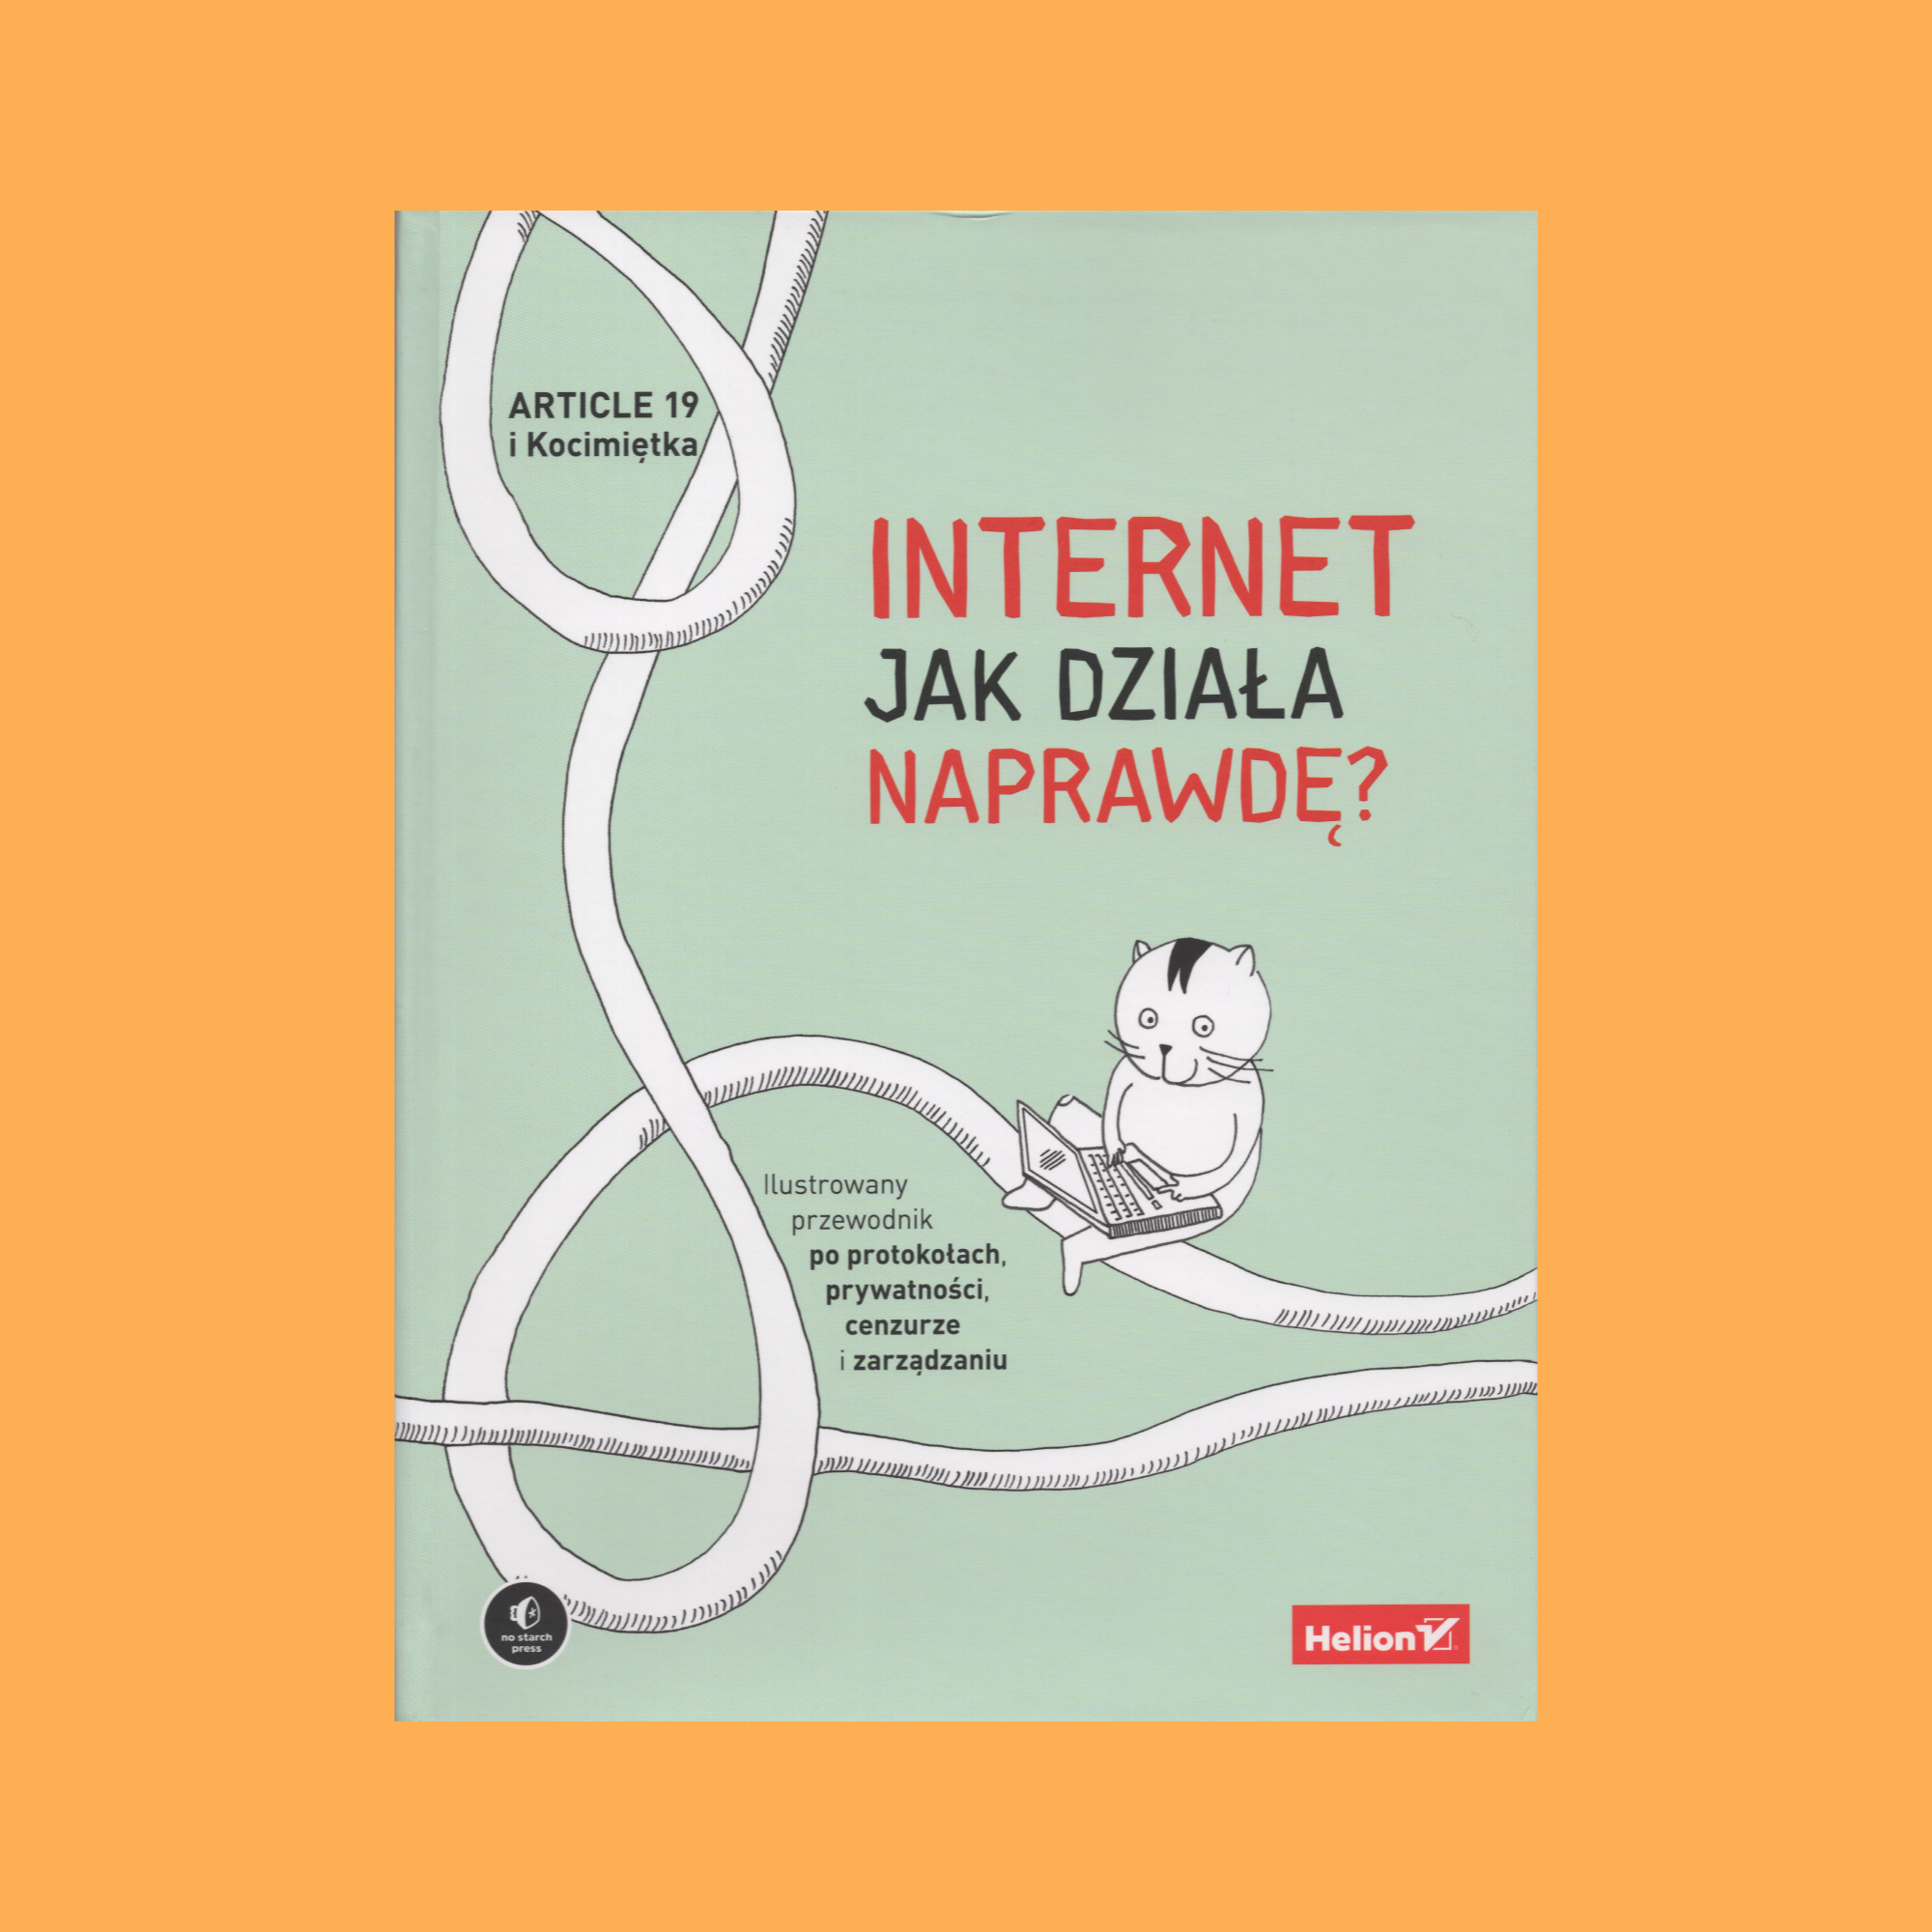 How the Internet Really Works book Polish cover. Illustration and Layout: Ulrike Uhlig